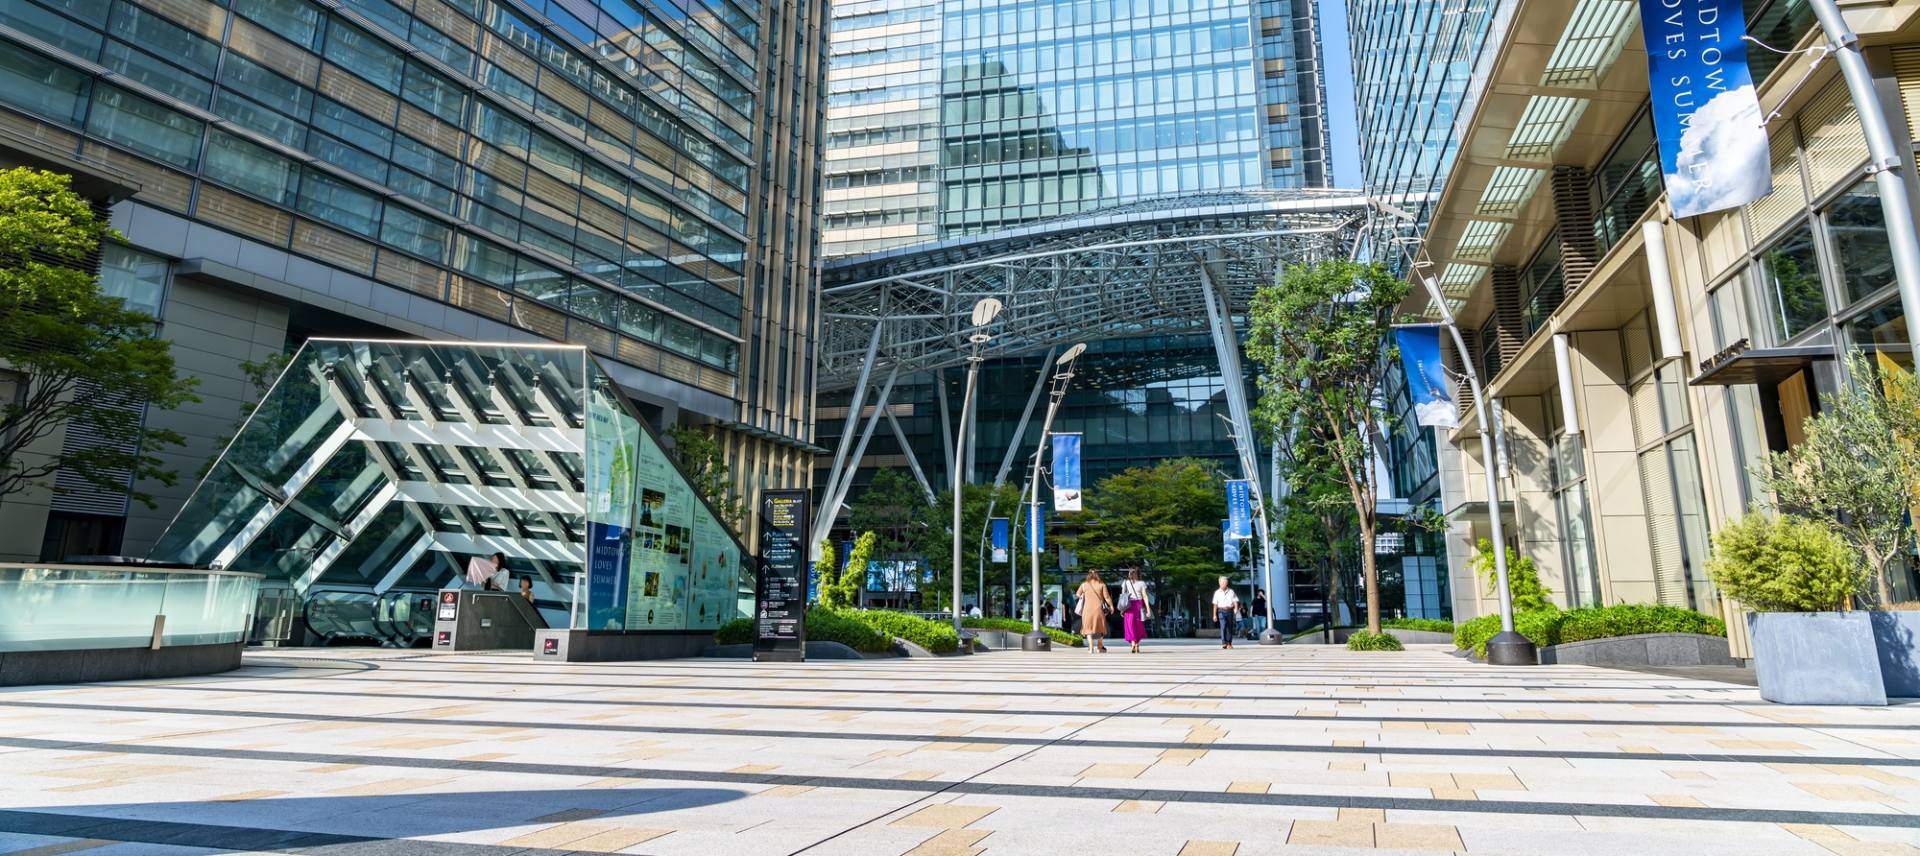 Tokyo Midtown Where To Shop Access Hours Price Good Luck Trip